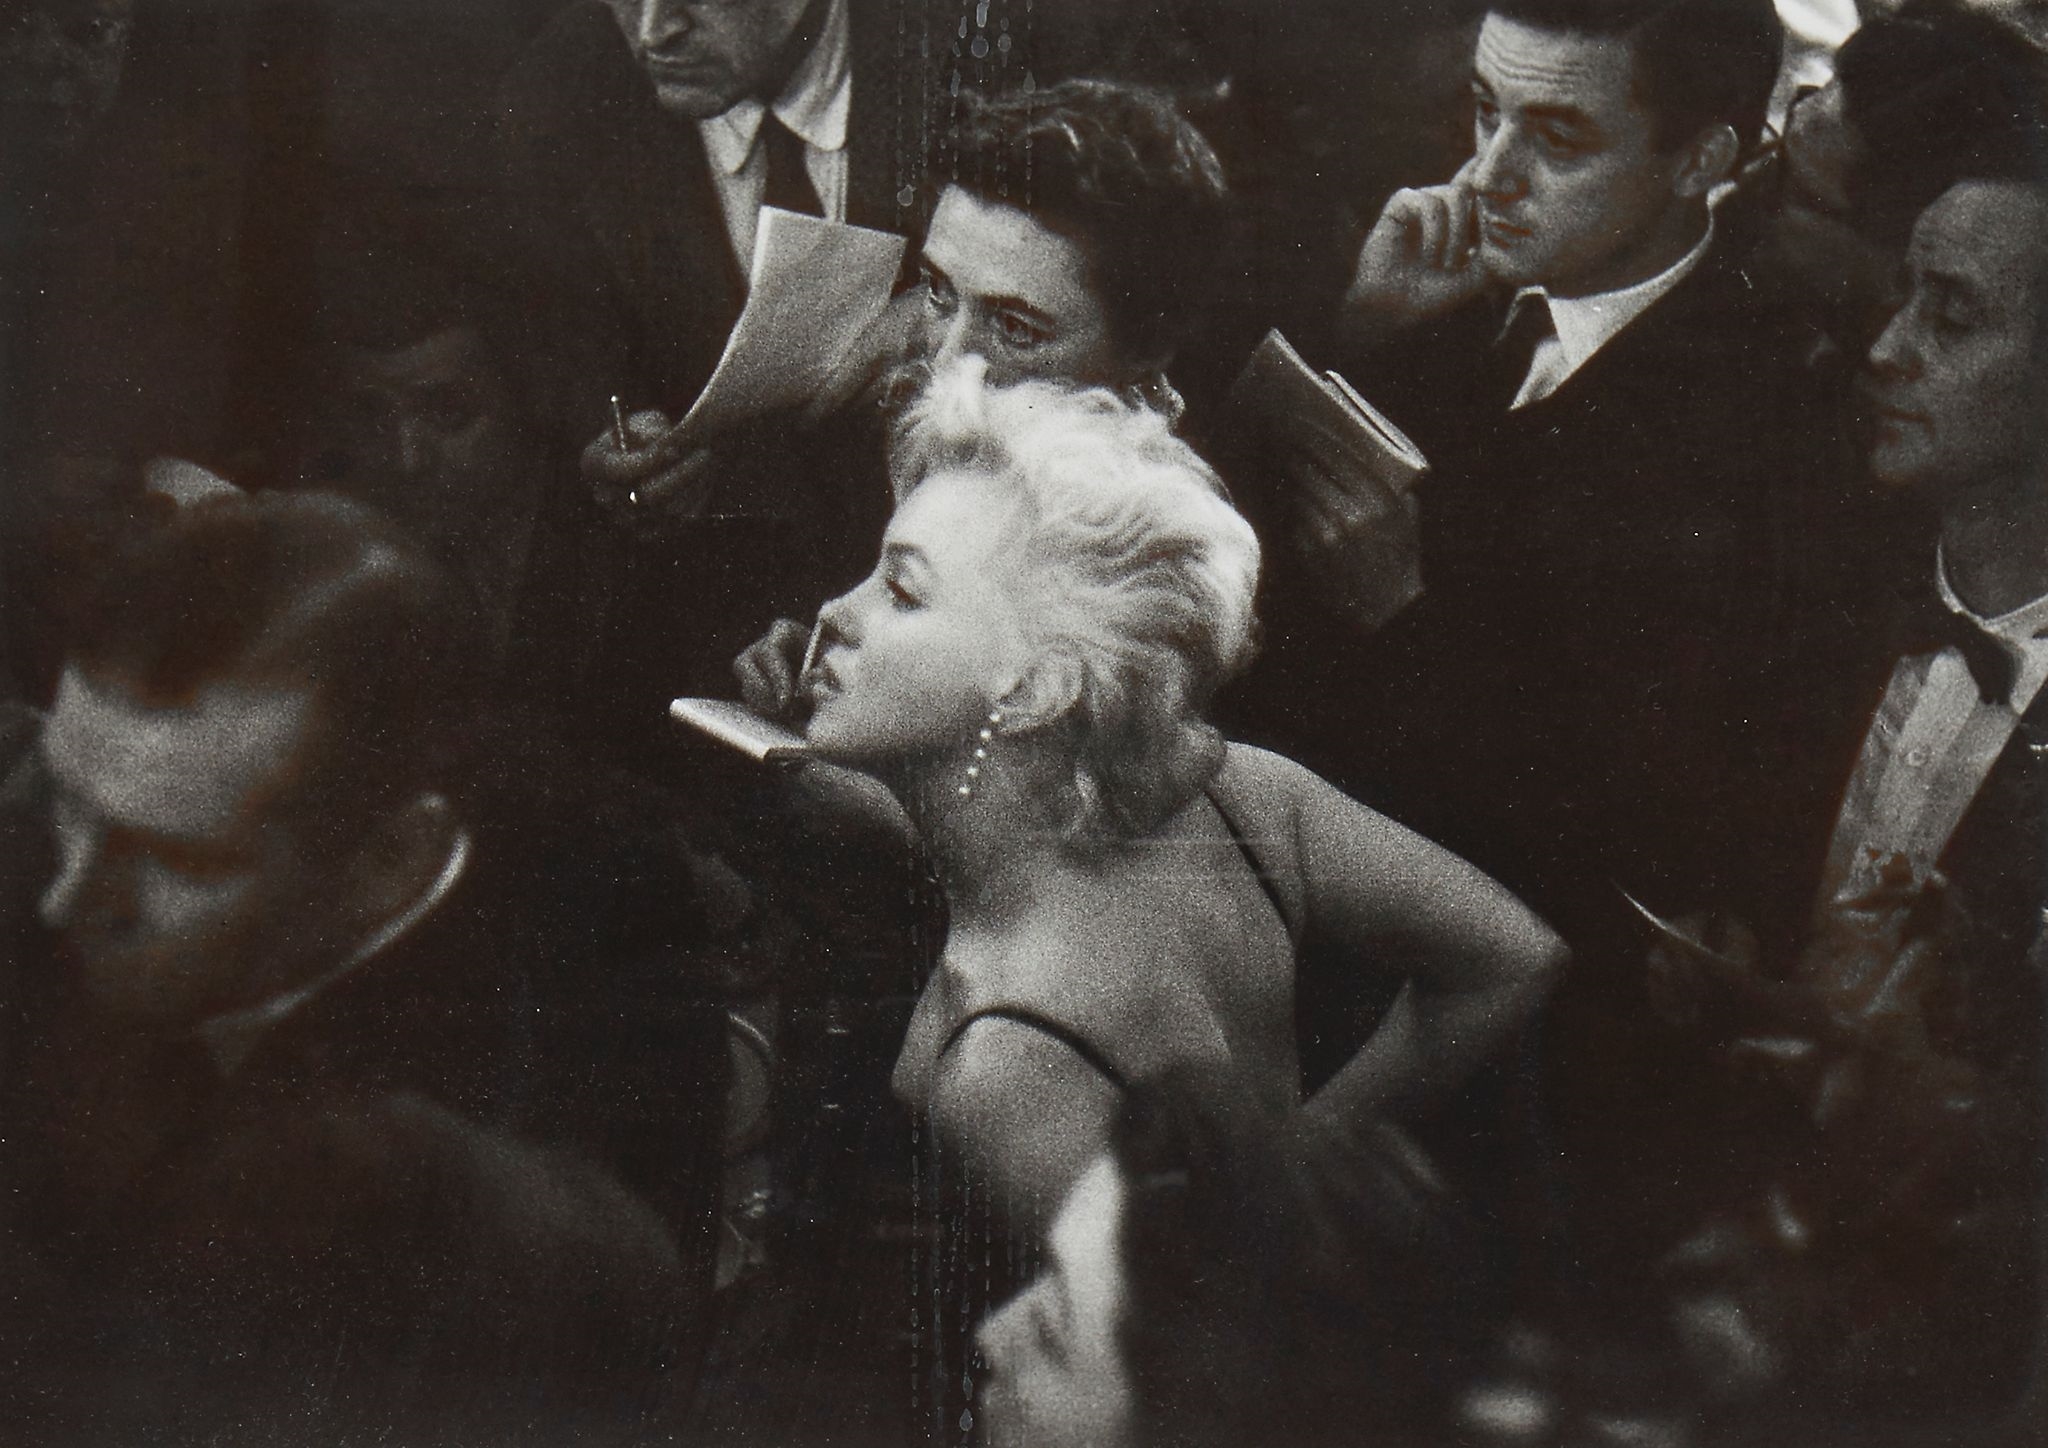 Marilyn Monroe & Laurence Olivier at a Press Conference at the Plaza Hotel